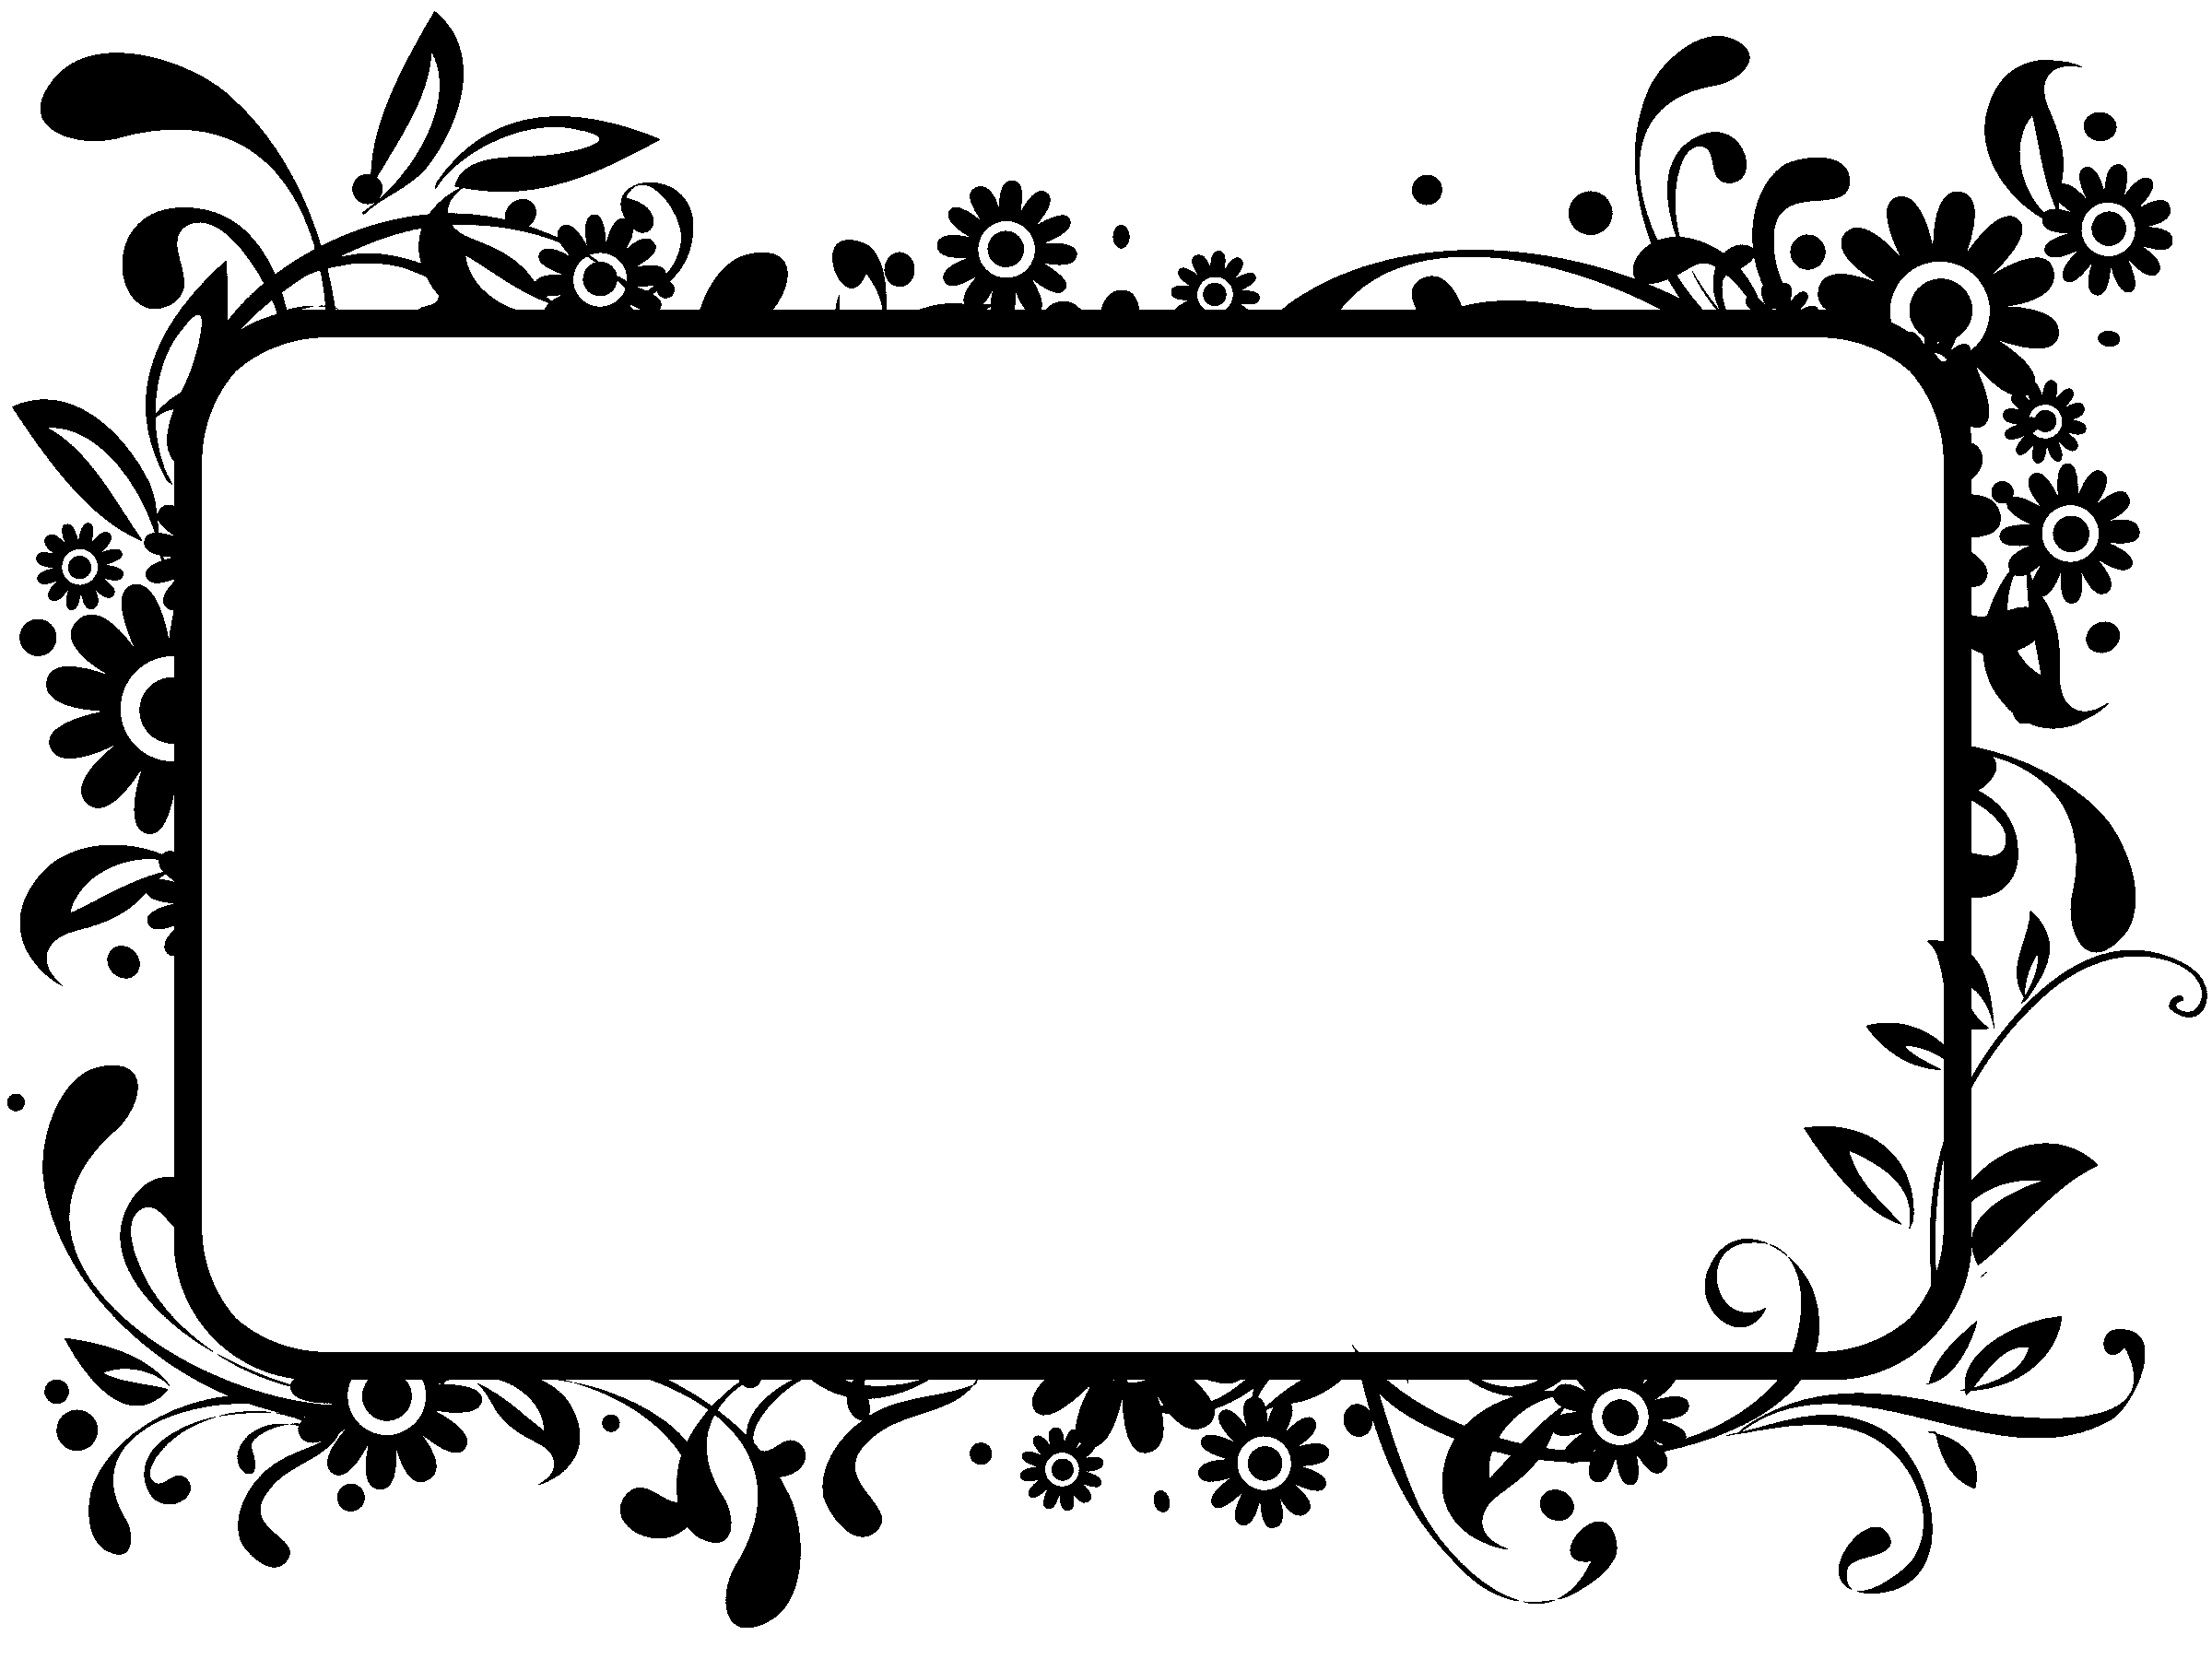 Black And White Flower Clip Art Borders | picturespider.com